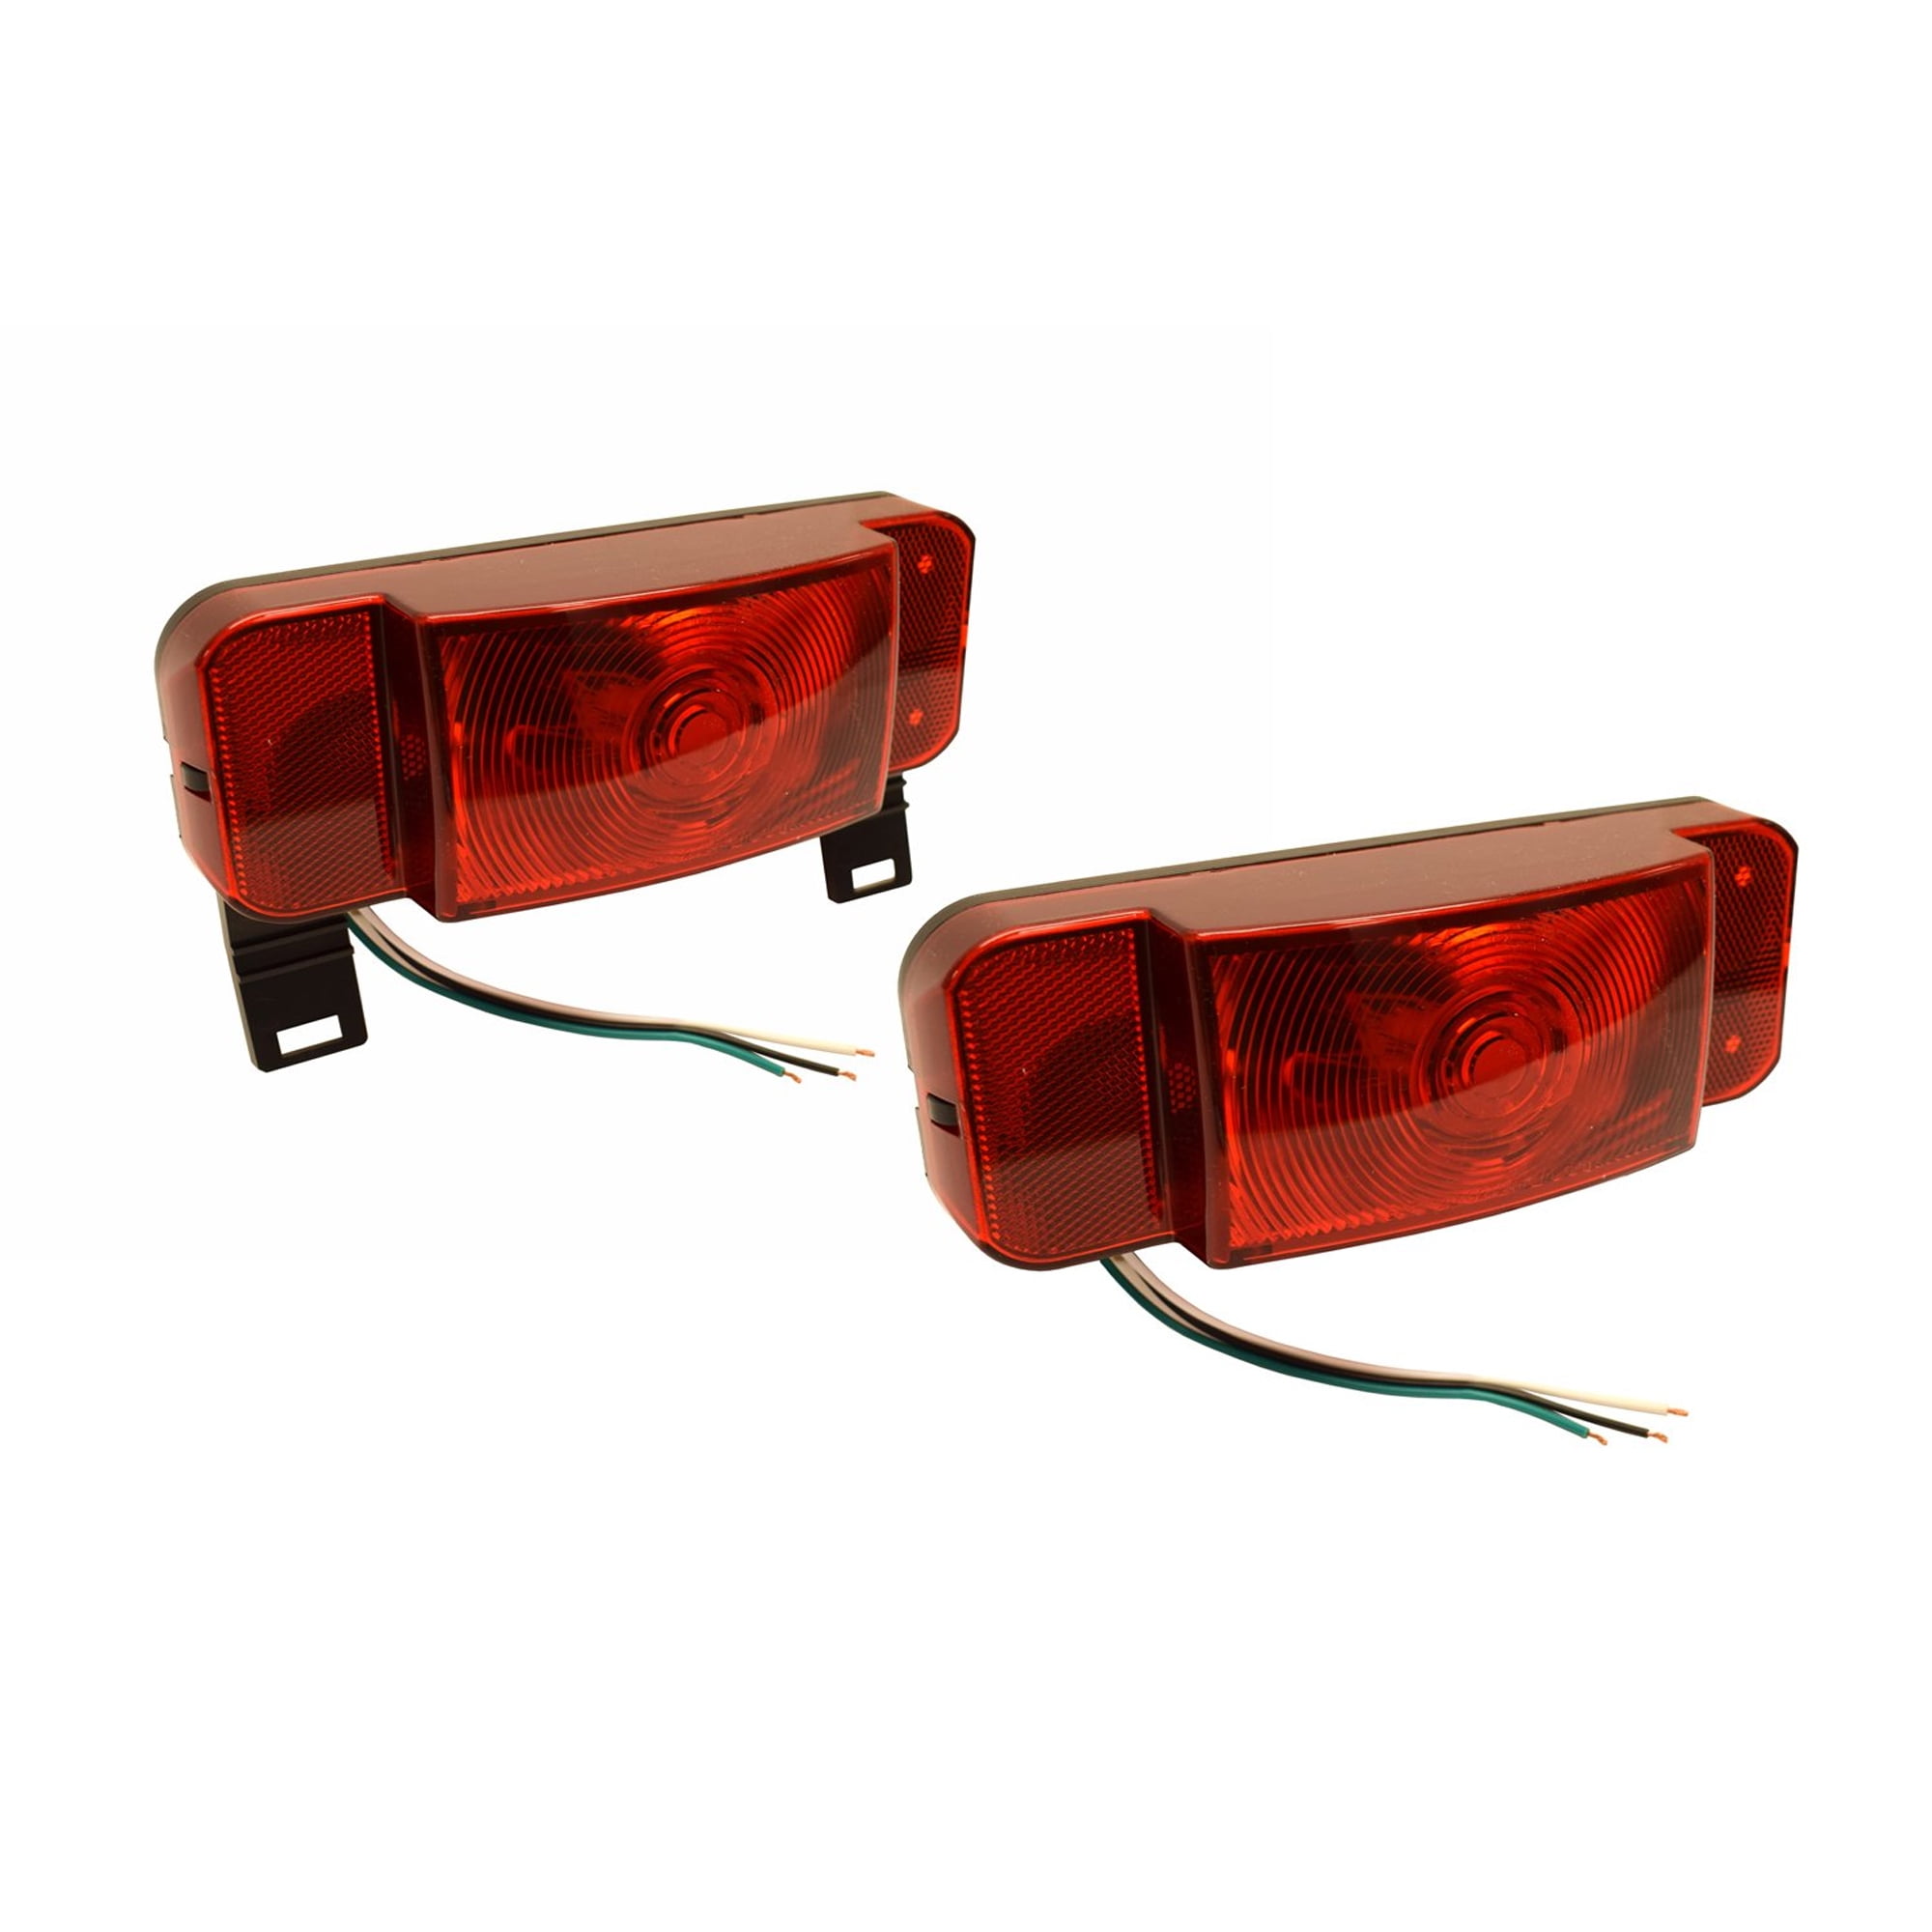 Details about   NATIONAL RV TROPICAL 2006 2007 BLACK TAIL LAMP LIGHT TAILLIGHTS RV SET 